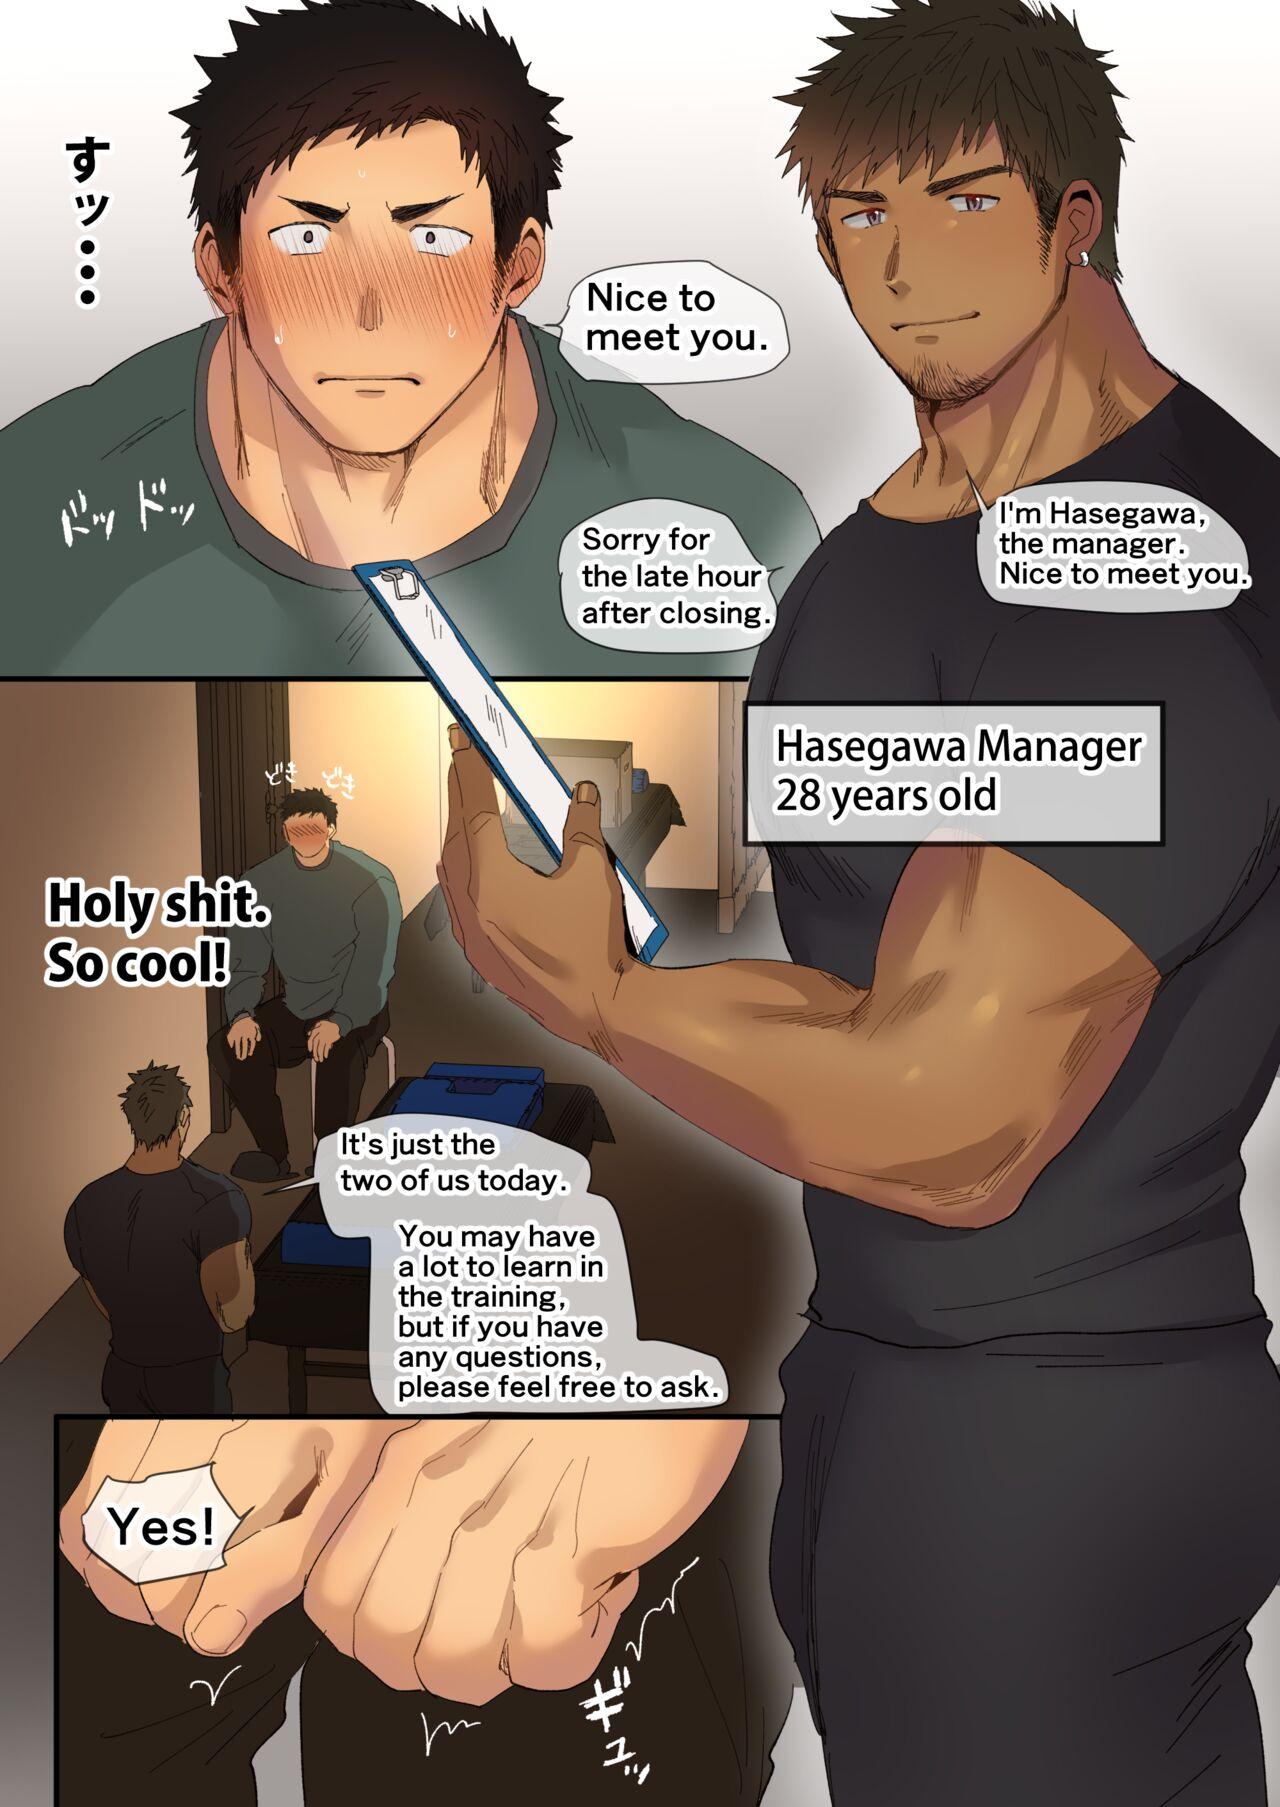 Cheat A manga about an athletic college student who receives sexually explicit massage training from an older manager - Original Brother - Picture 2